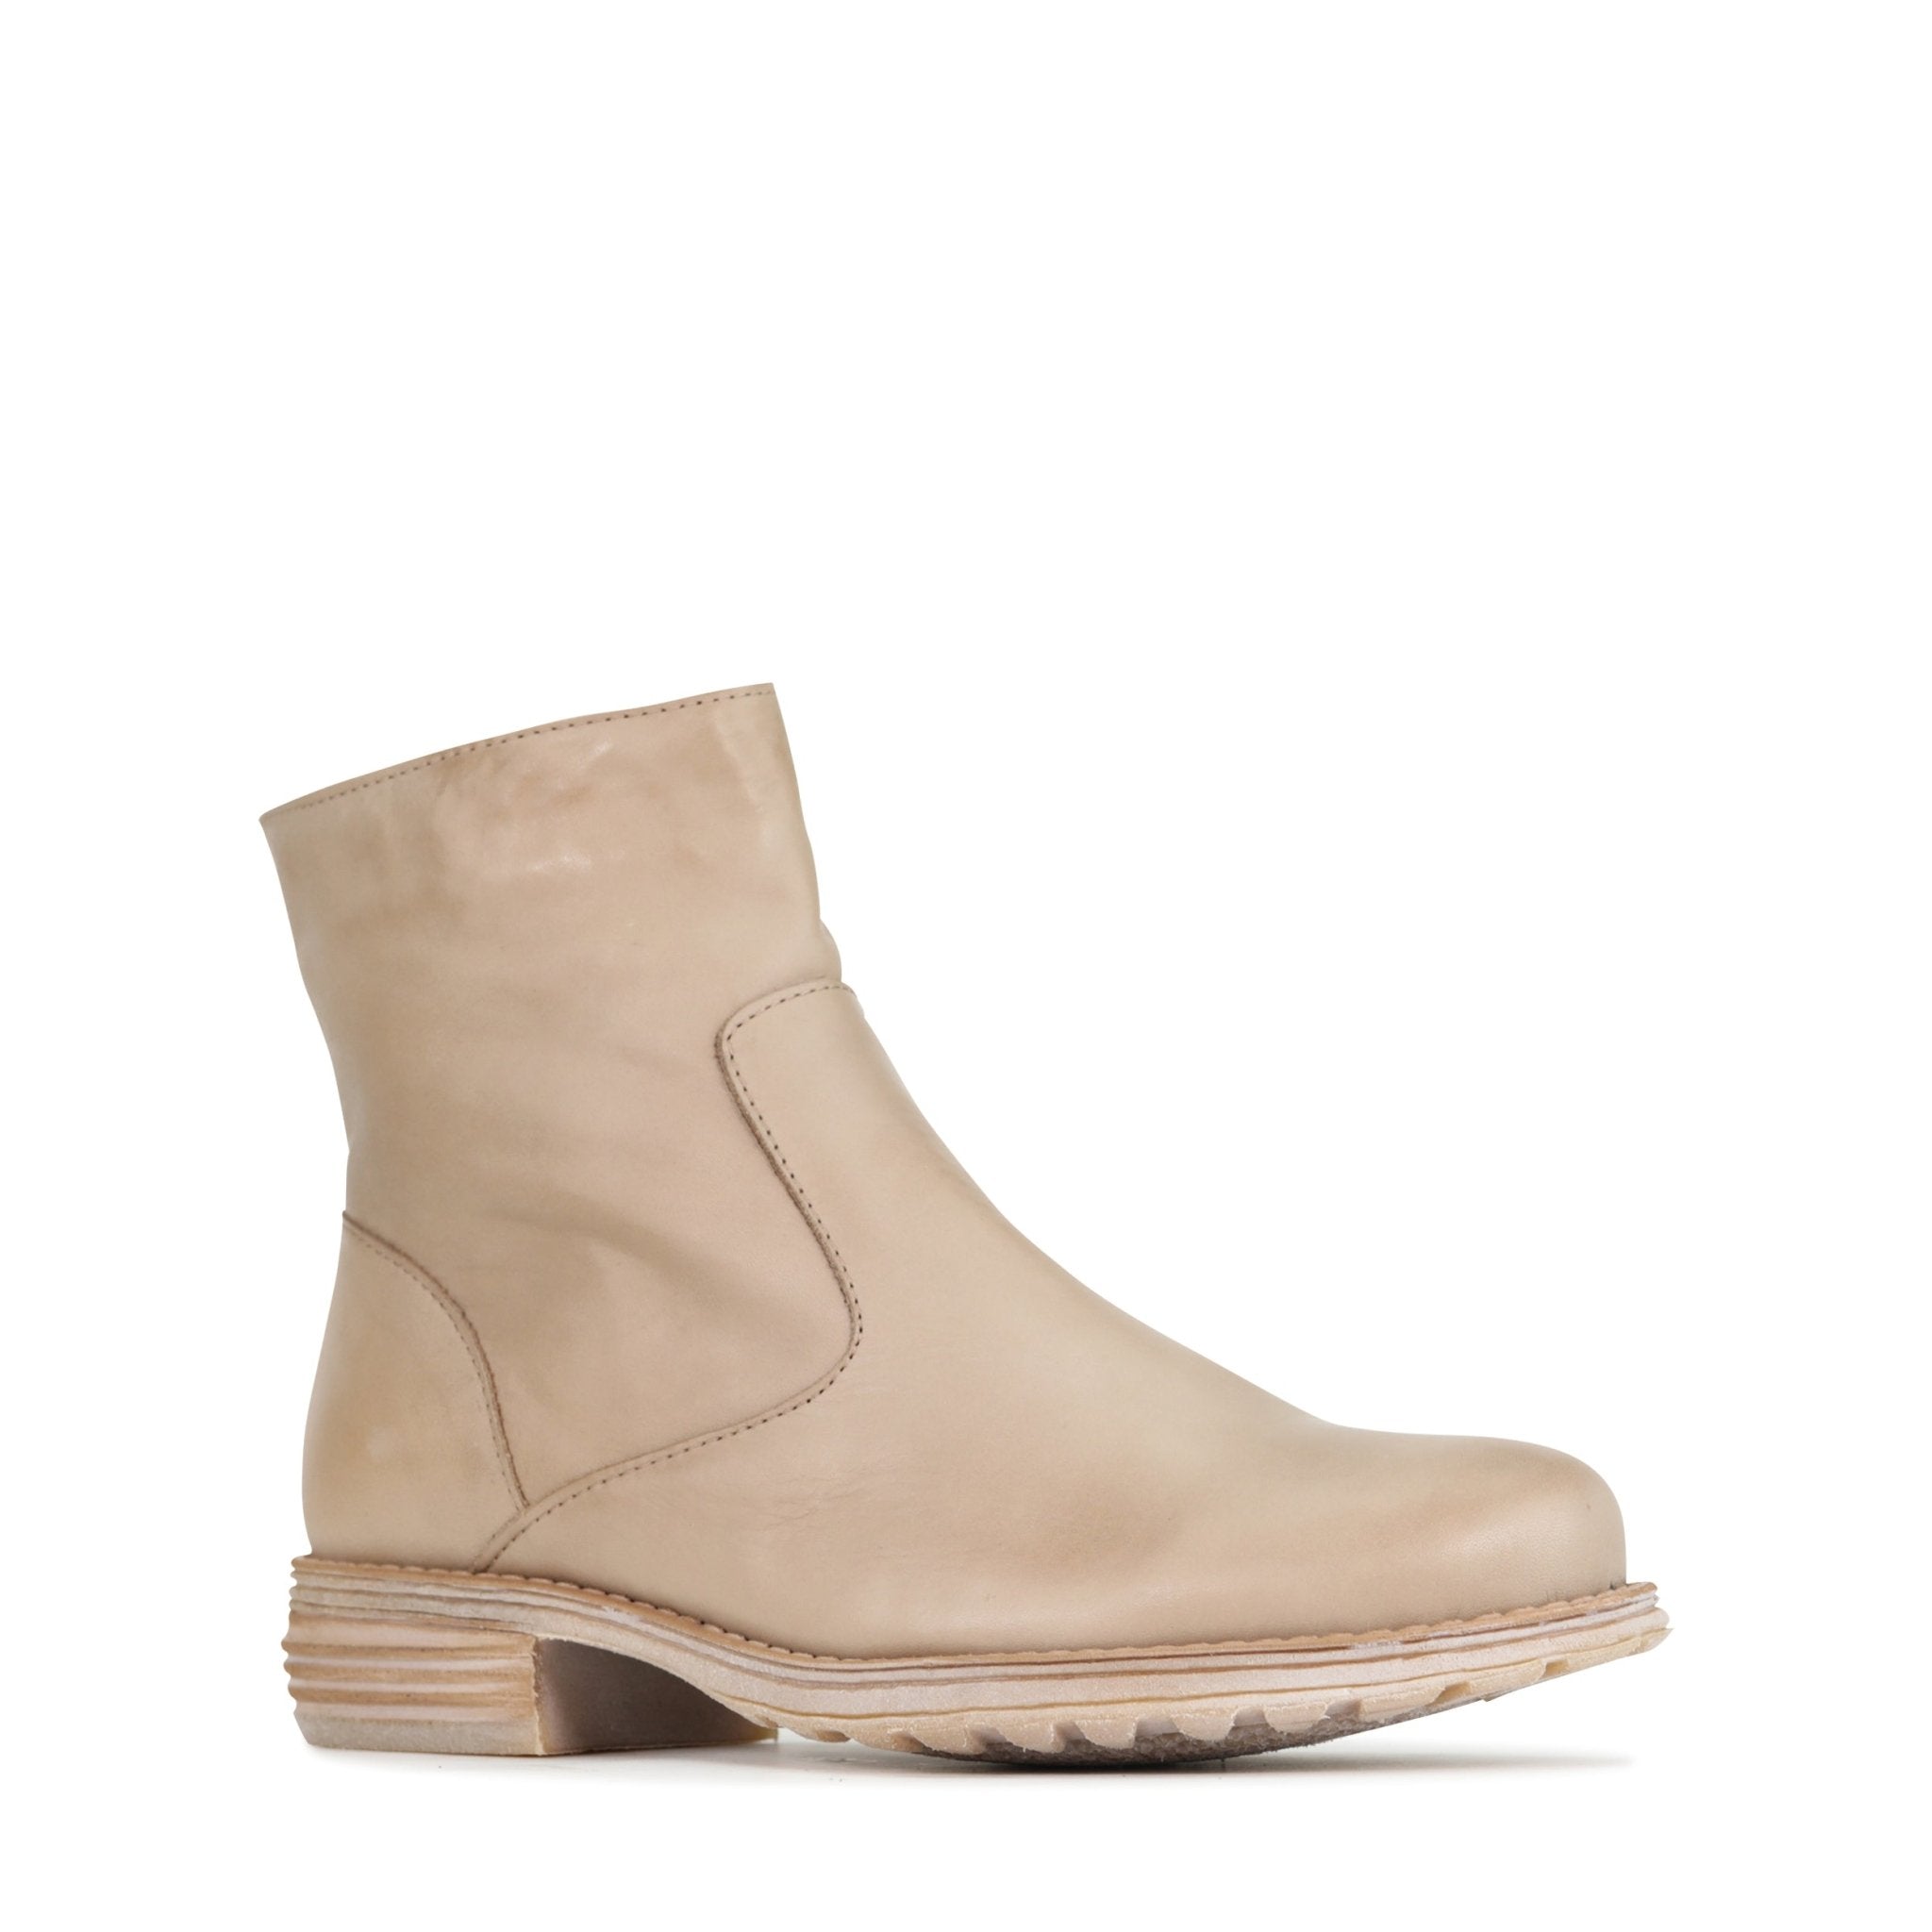 ZESPA - EOS Footwear - Ankle Boots #color_Taupe